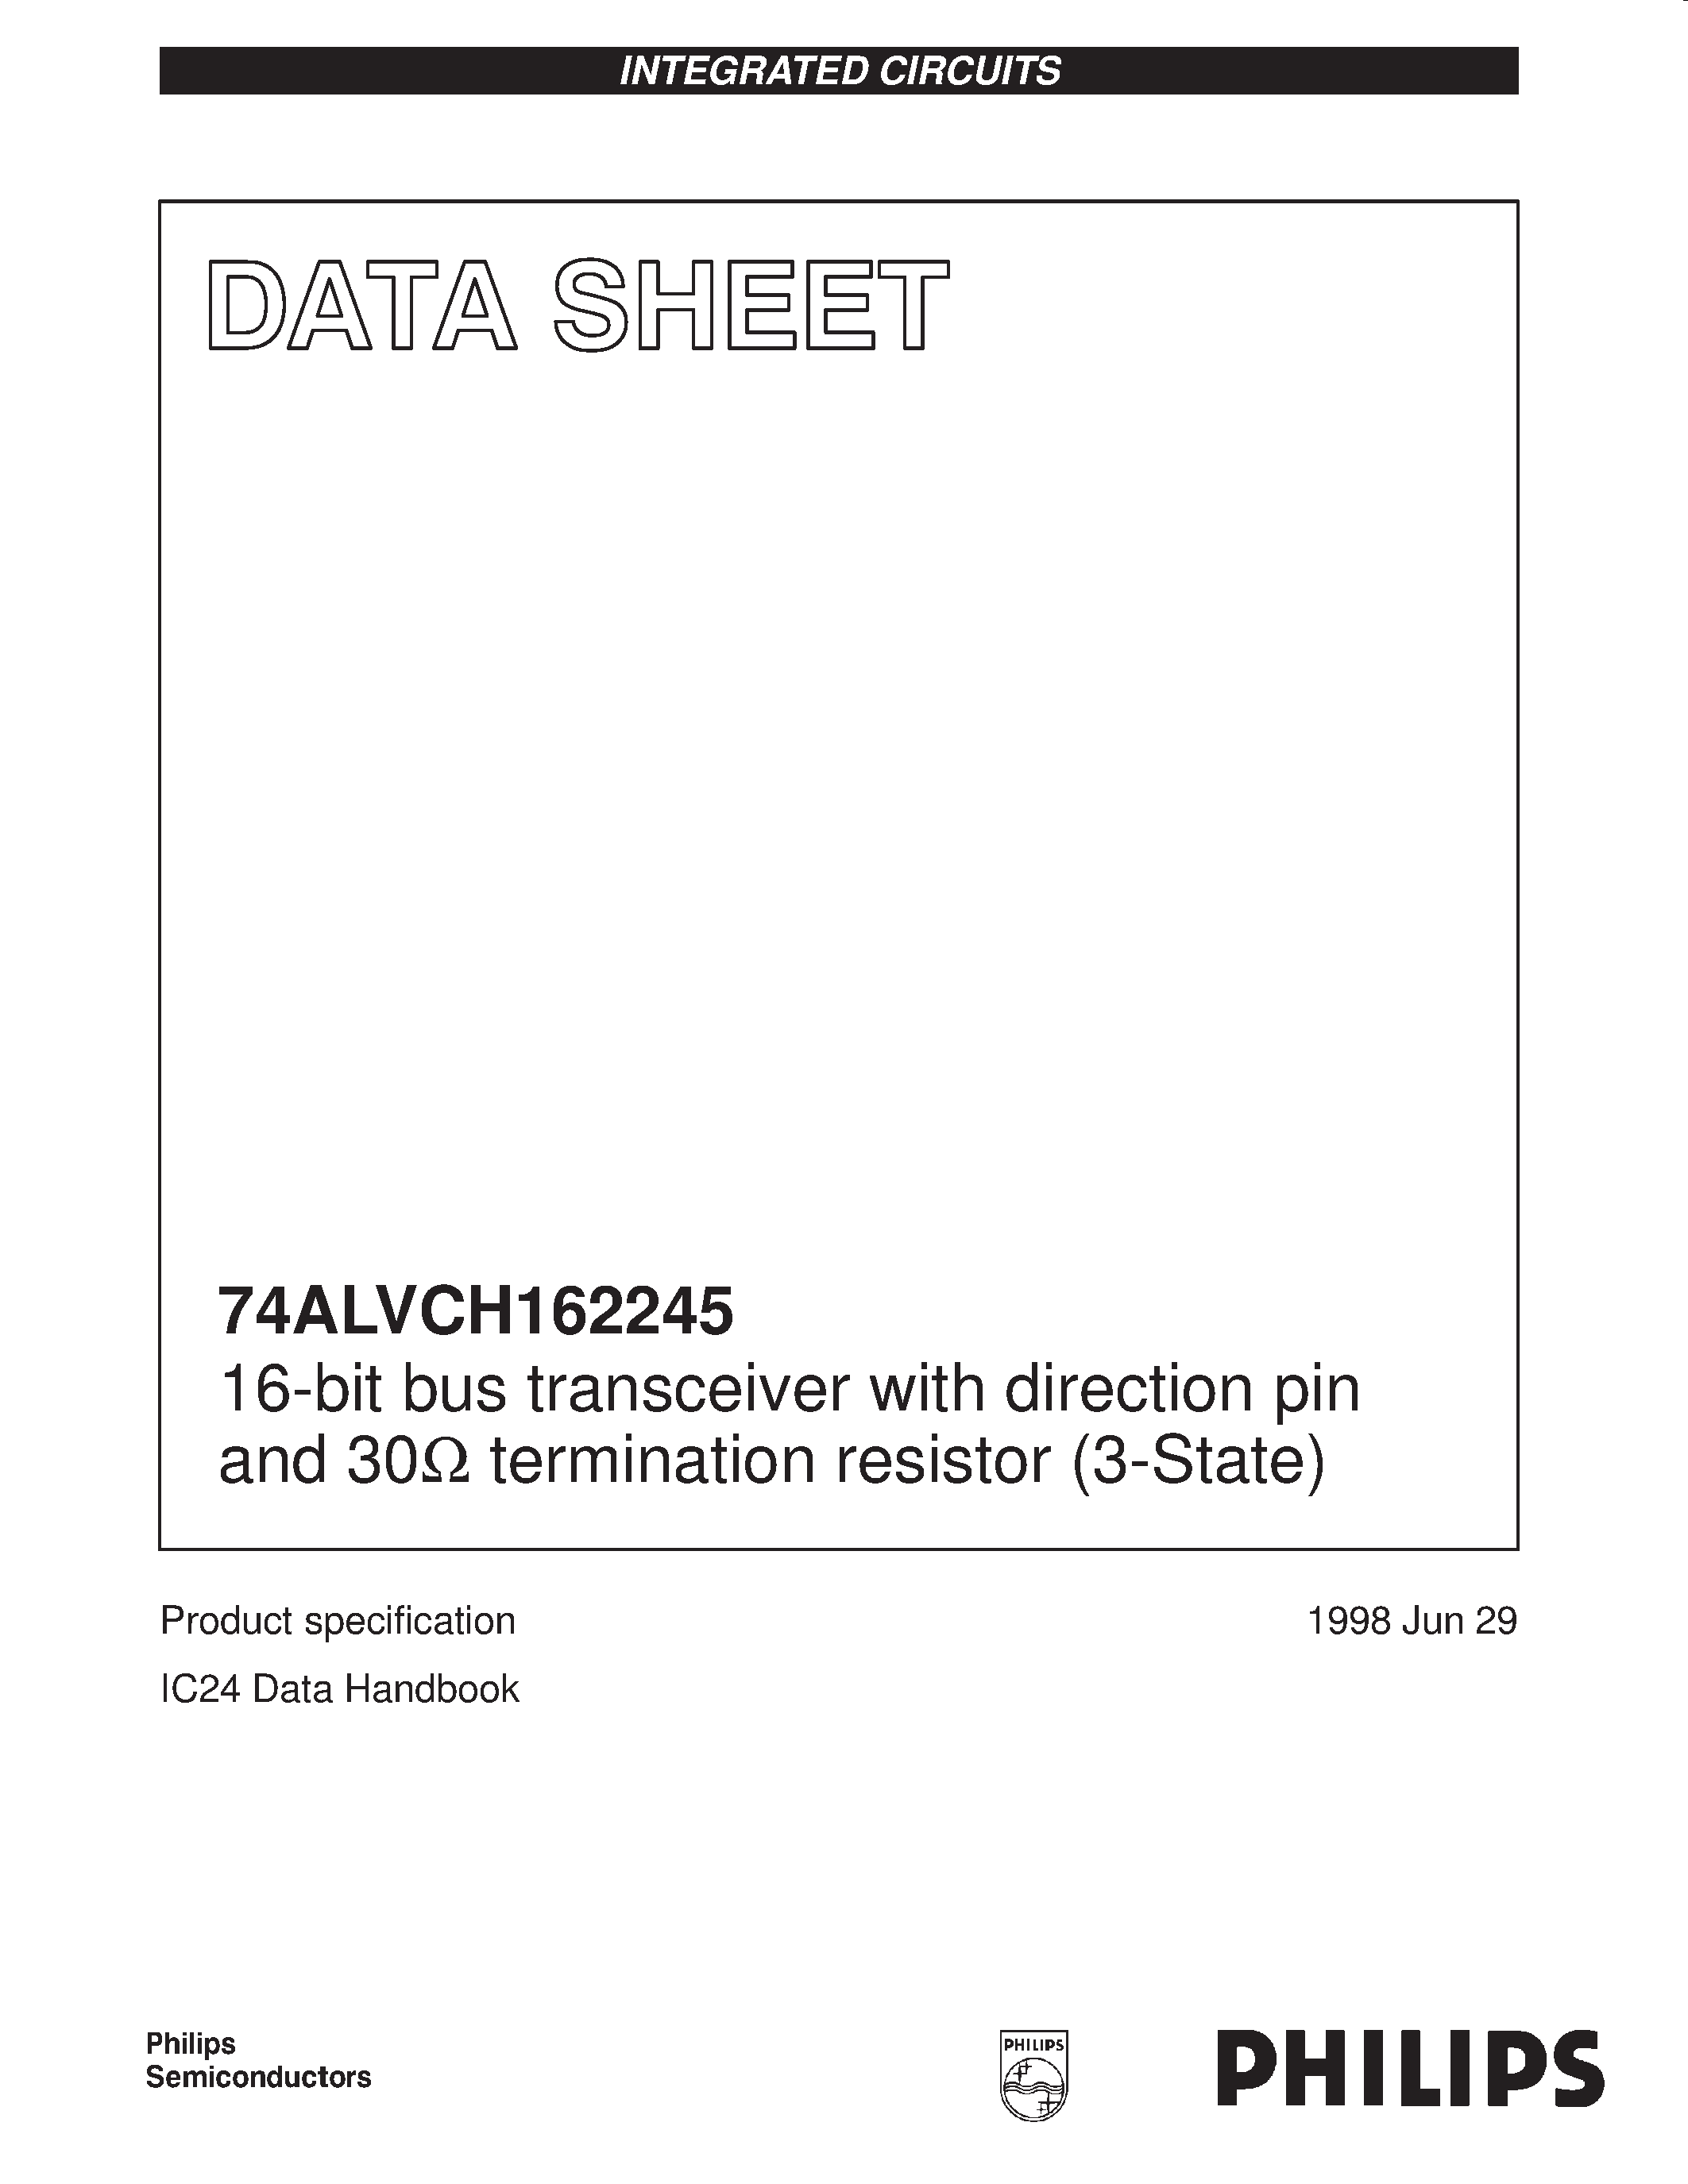 Даташит 74ALVCH162245DL - 16-bit bus transceiver with direction pin and 30ohm termination resistor 3-State страница 1